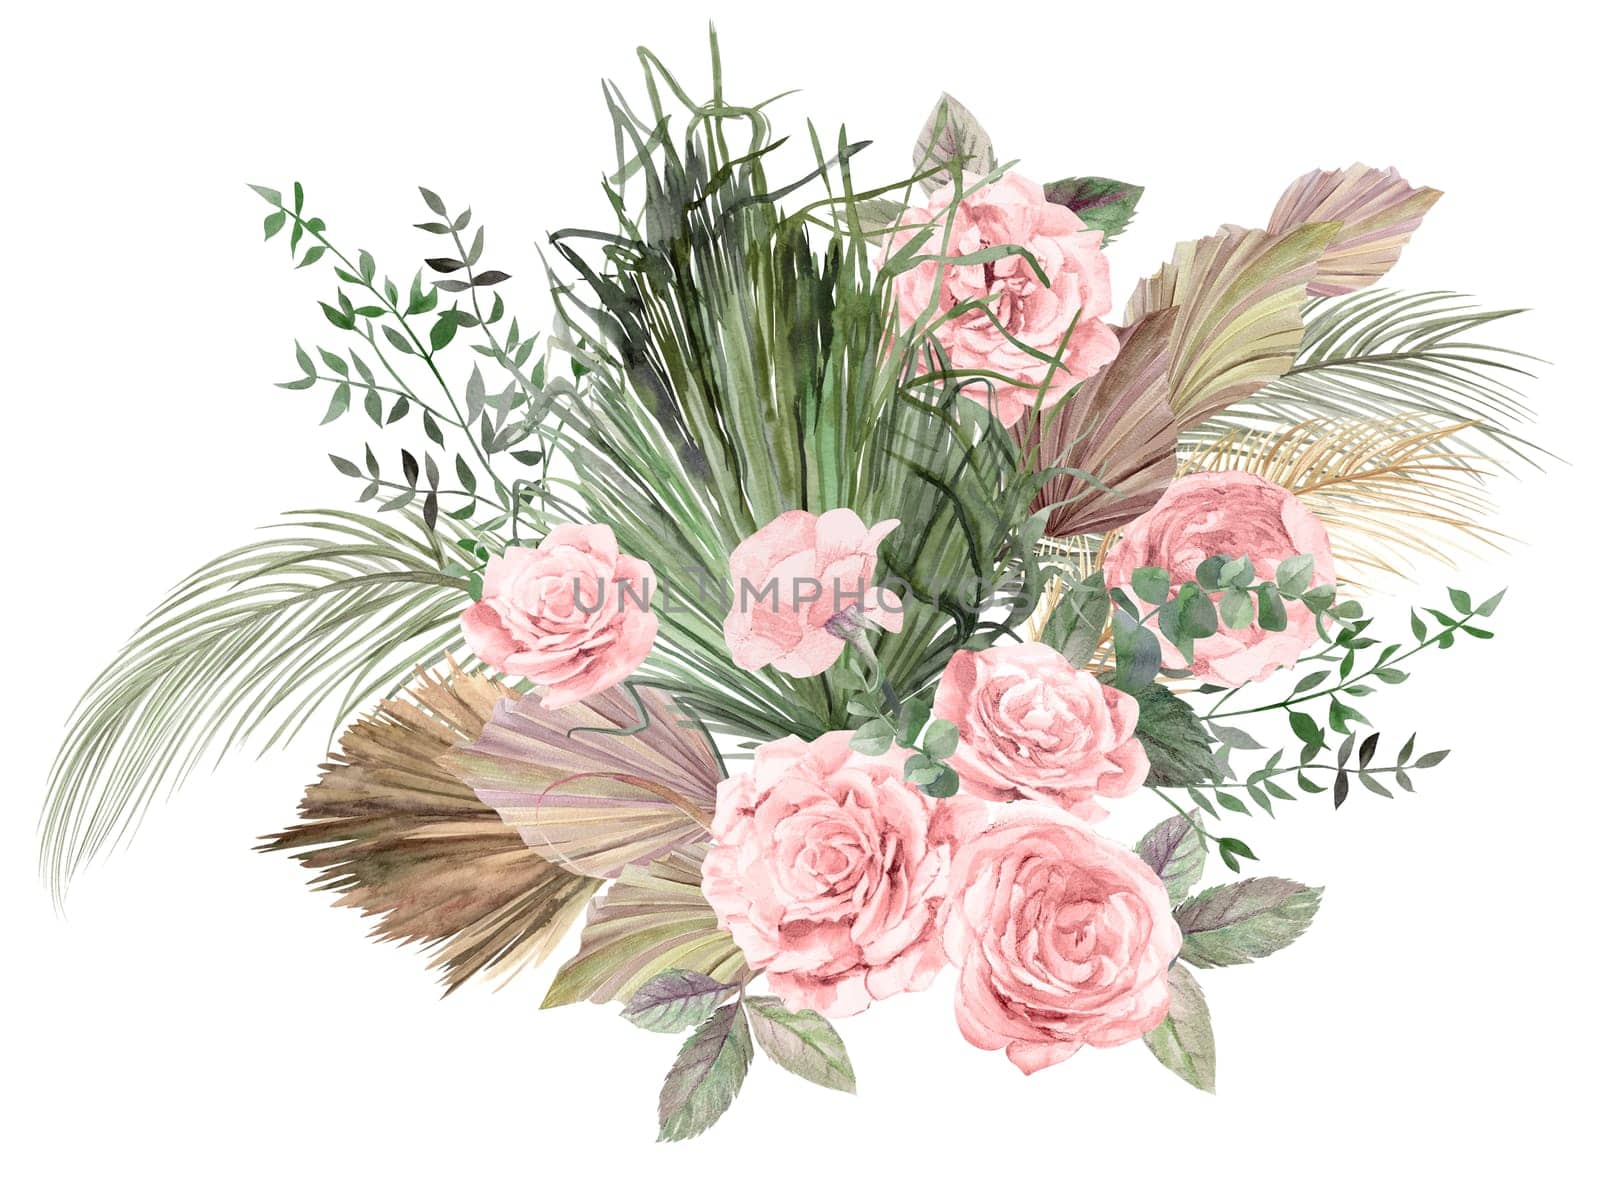 Watercolor illustration with a bouquet with flowers of light roses and dried flowers and palm leaves in Boho style isolated on a white background